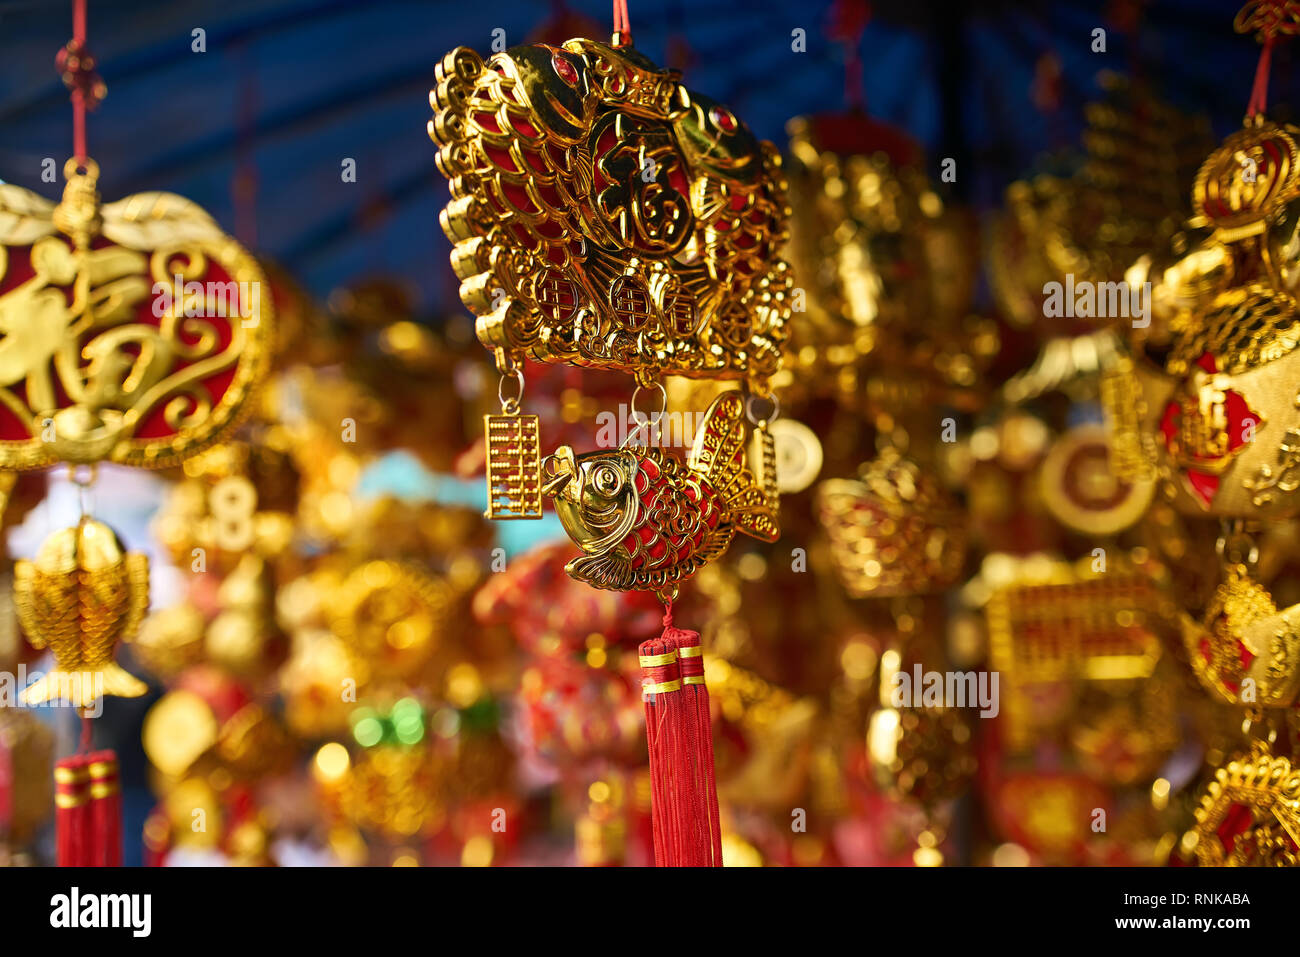 Traditional oriental golden-red decorations with fish figurines and ornaments on the street market during the celebration of Lunar New Year in Bangkok Stock Photo